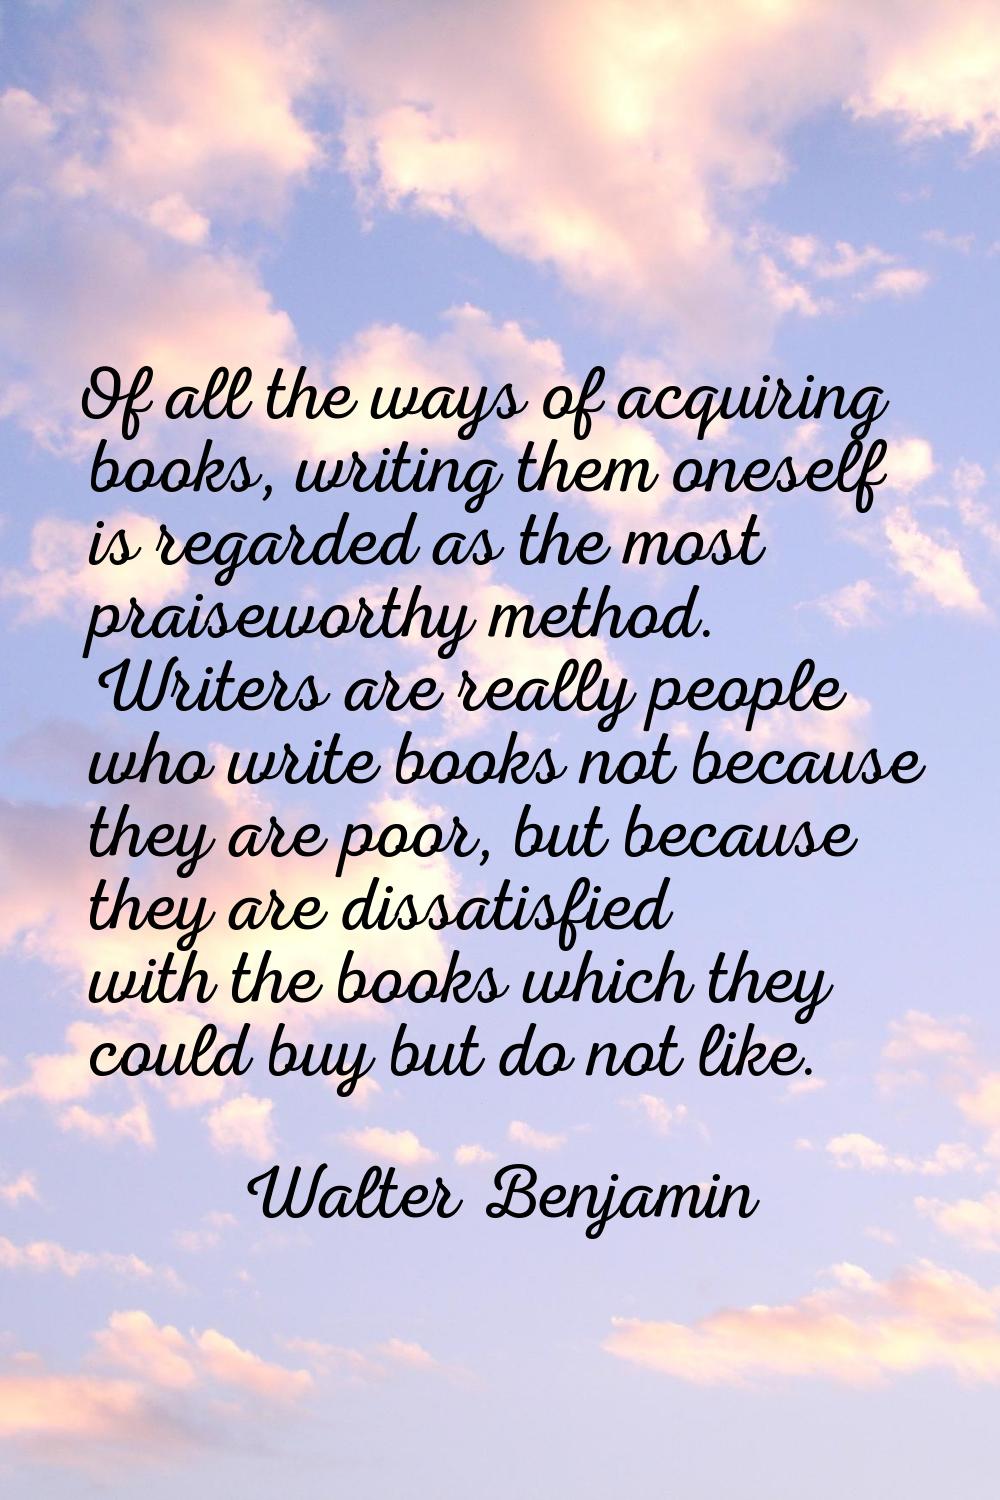 Of all the ways of acquiring books, writing them oneself is regarded as the most praiseworthy metho